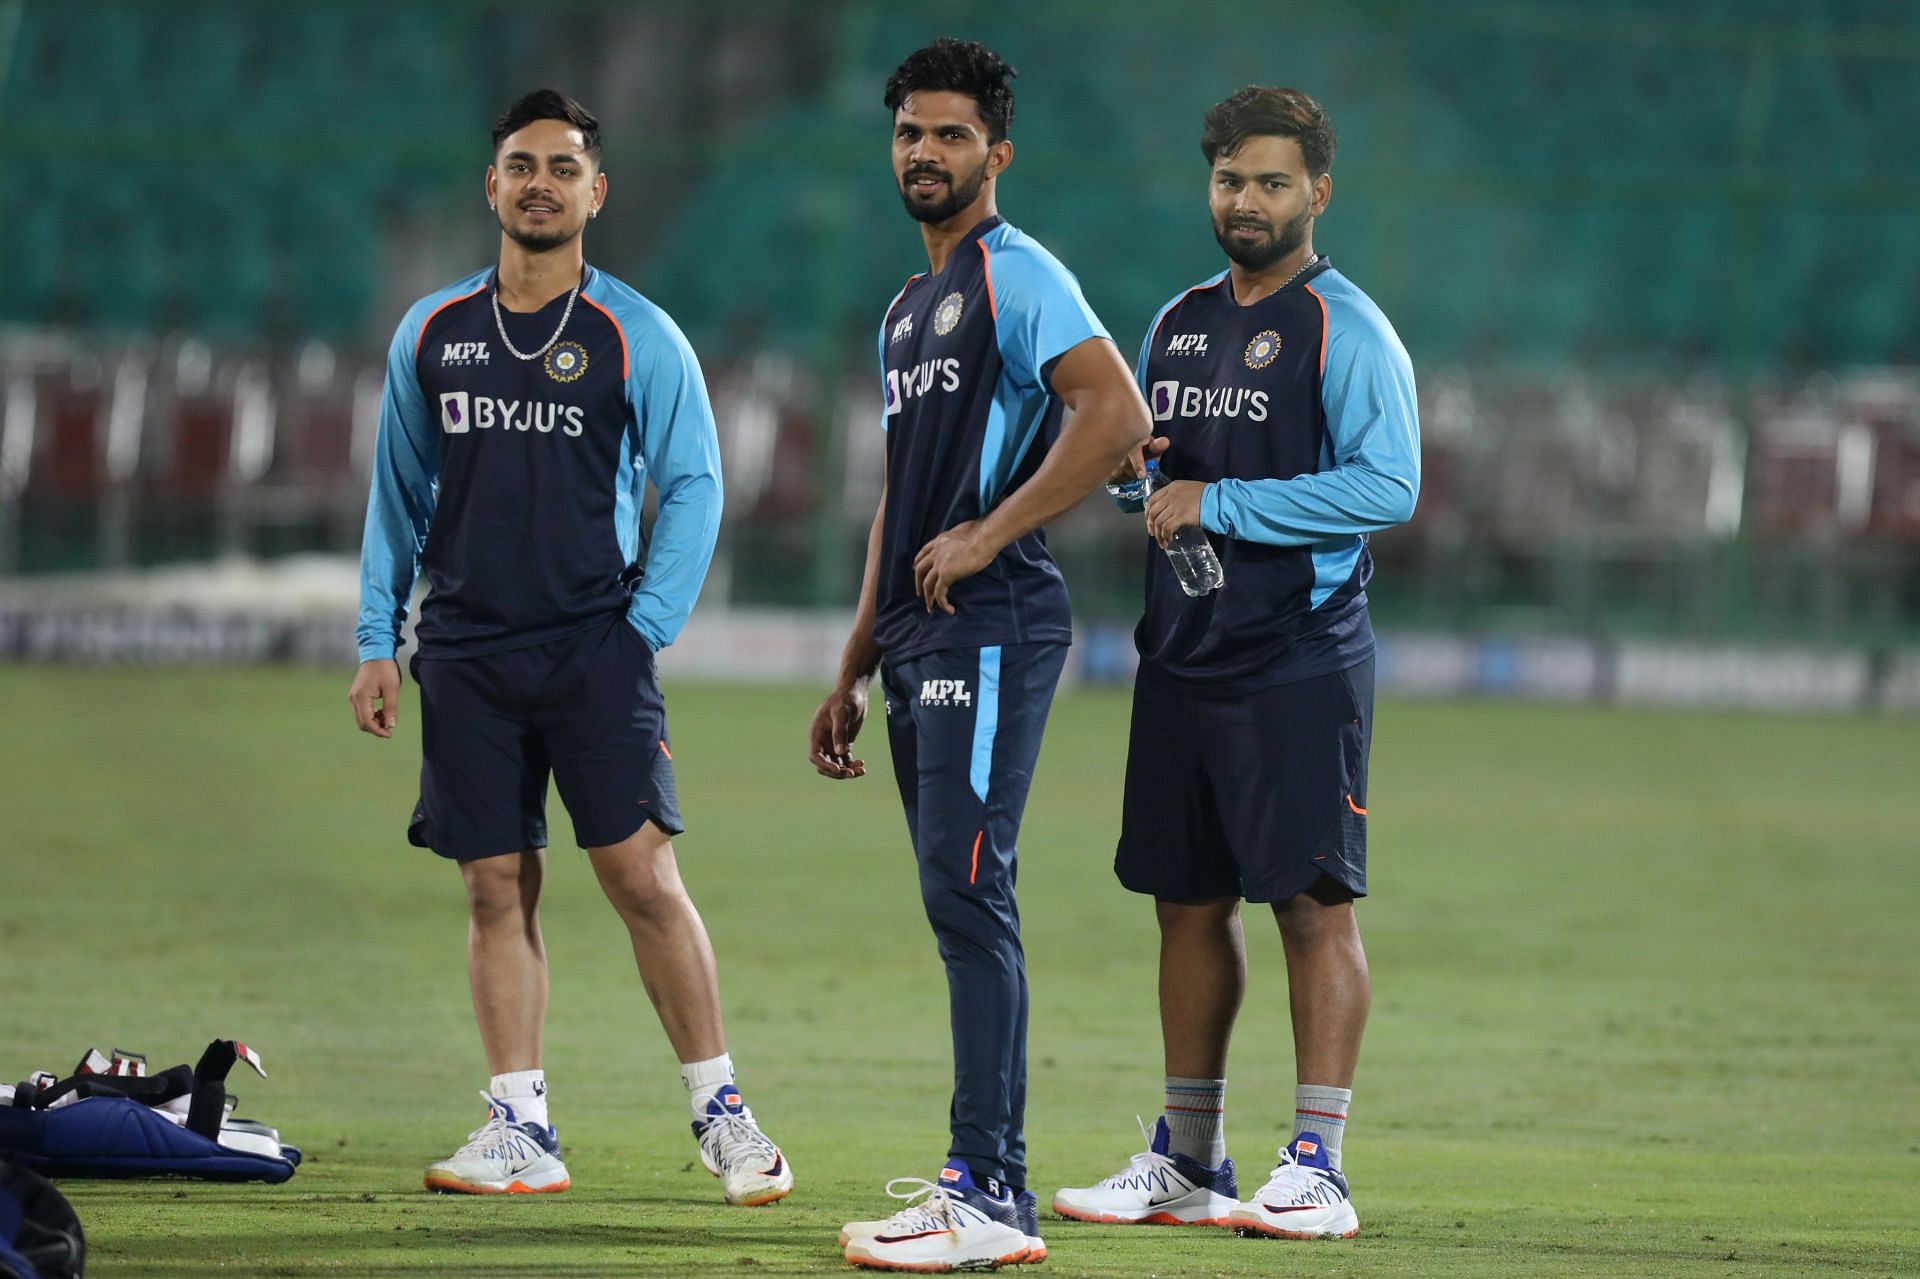 India will start their series against New Zealand as favourites